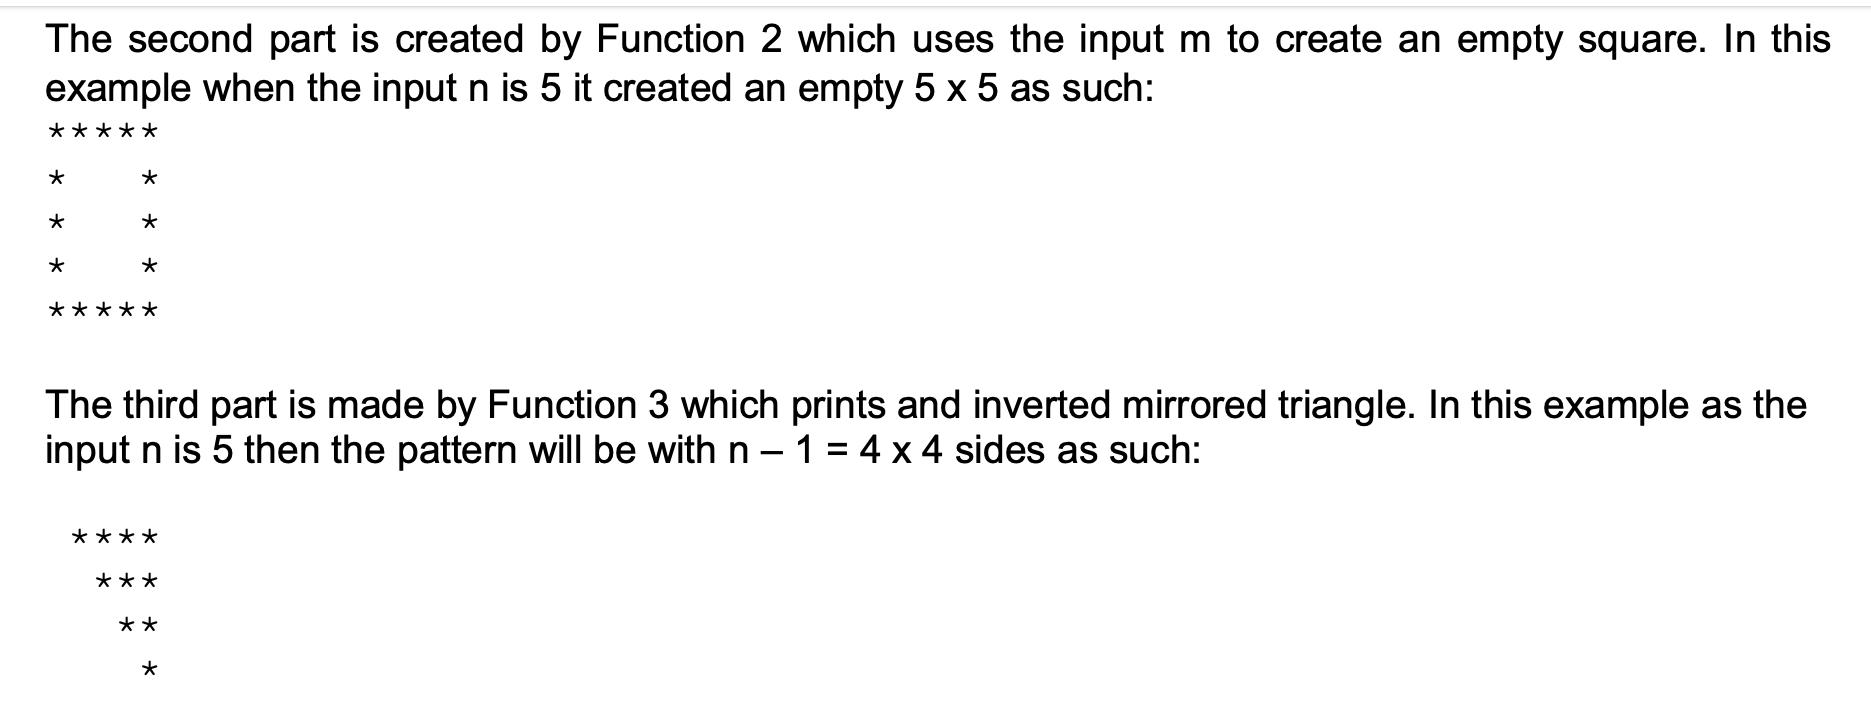 The second part is created by Function 2 which uses the input m to create an empty square. In this example